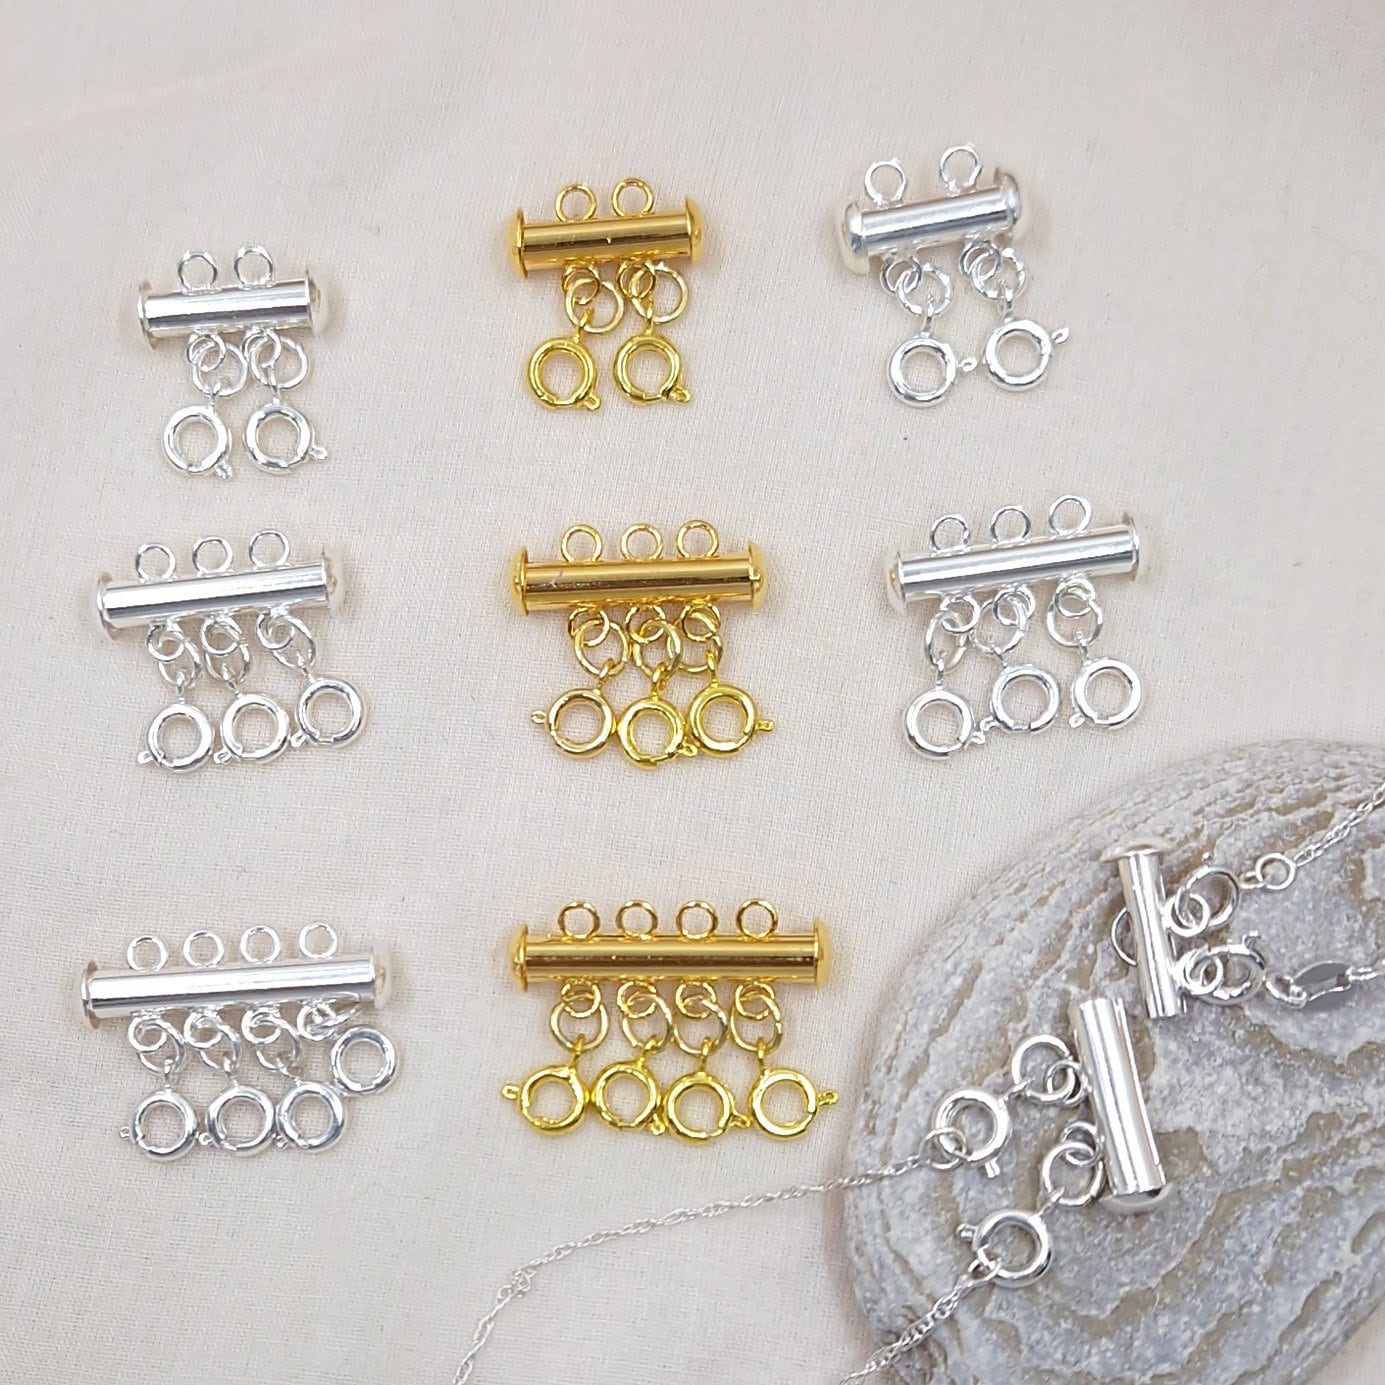 Multi Strand Chain Detangler Untangle, Layered Necklace Clasp, Layering  Spacer Slide Clasp, 2 Strand, 3 Strand, Silver Plate, Gold Filled 